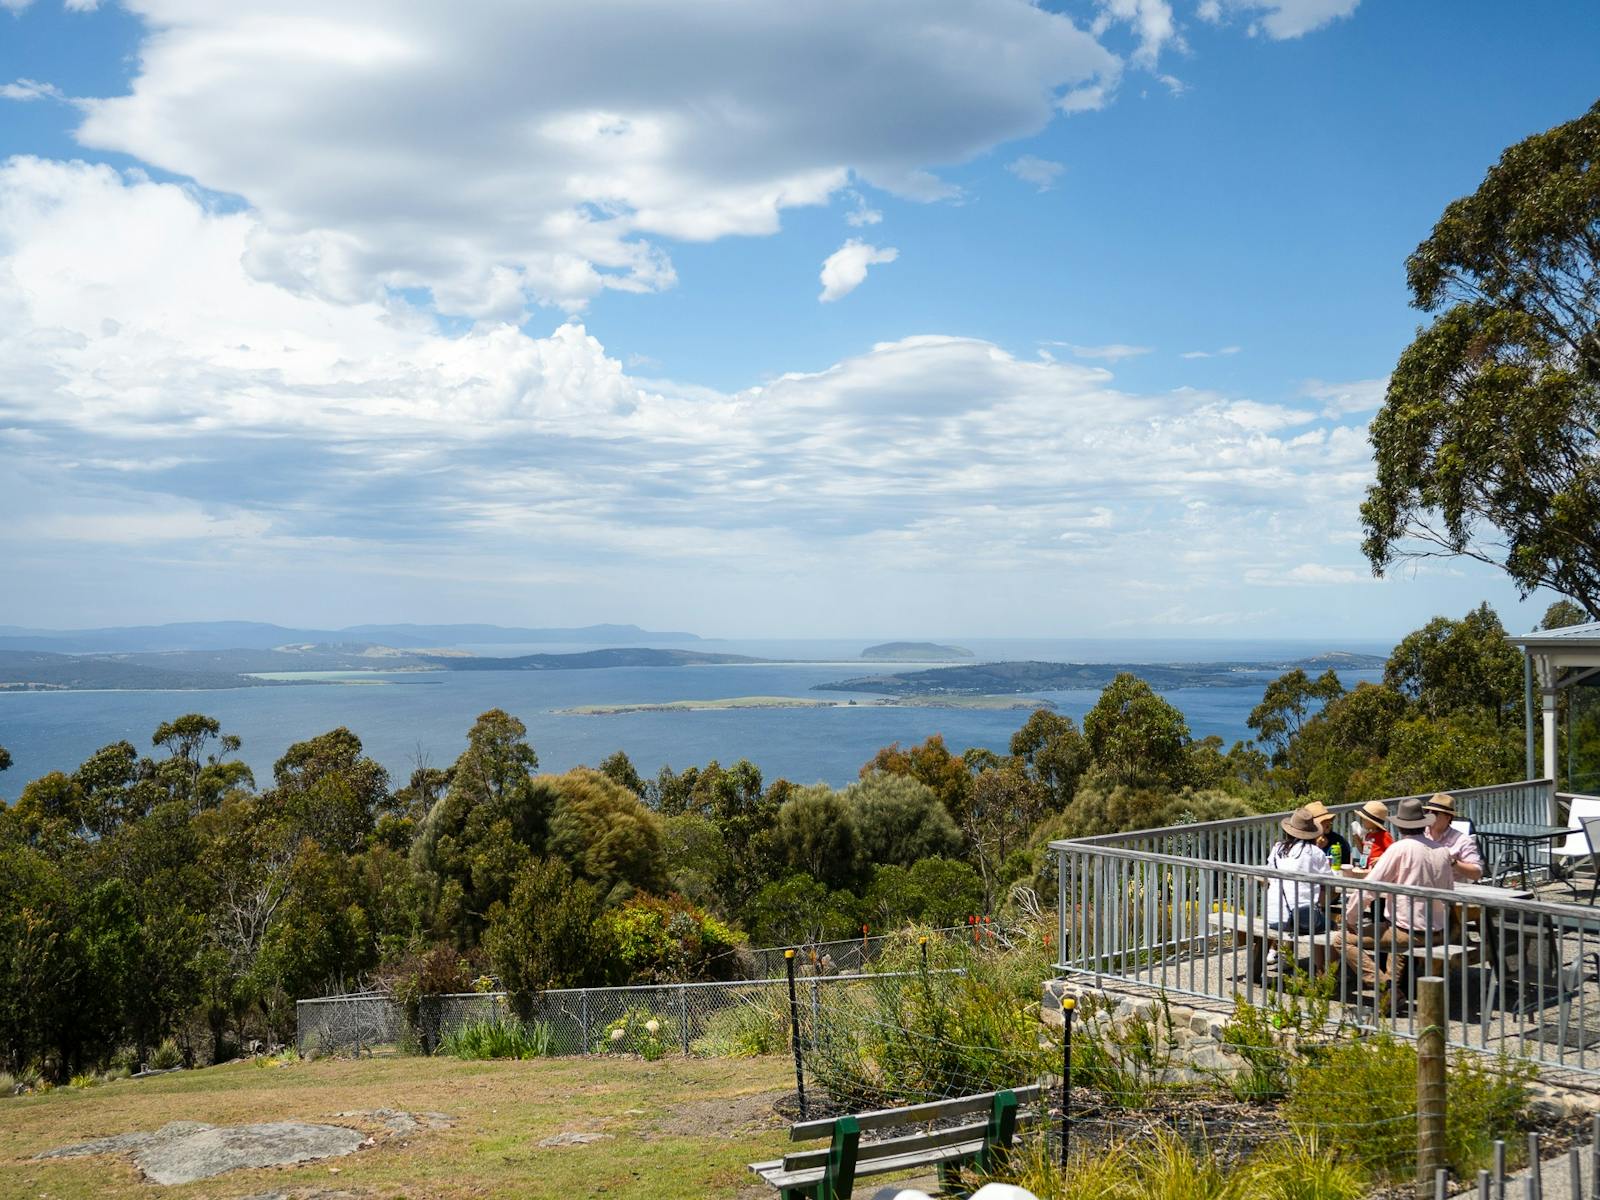 View of Derwent River from Mt. Nelson with people having lunch in foreground.